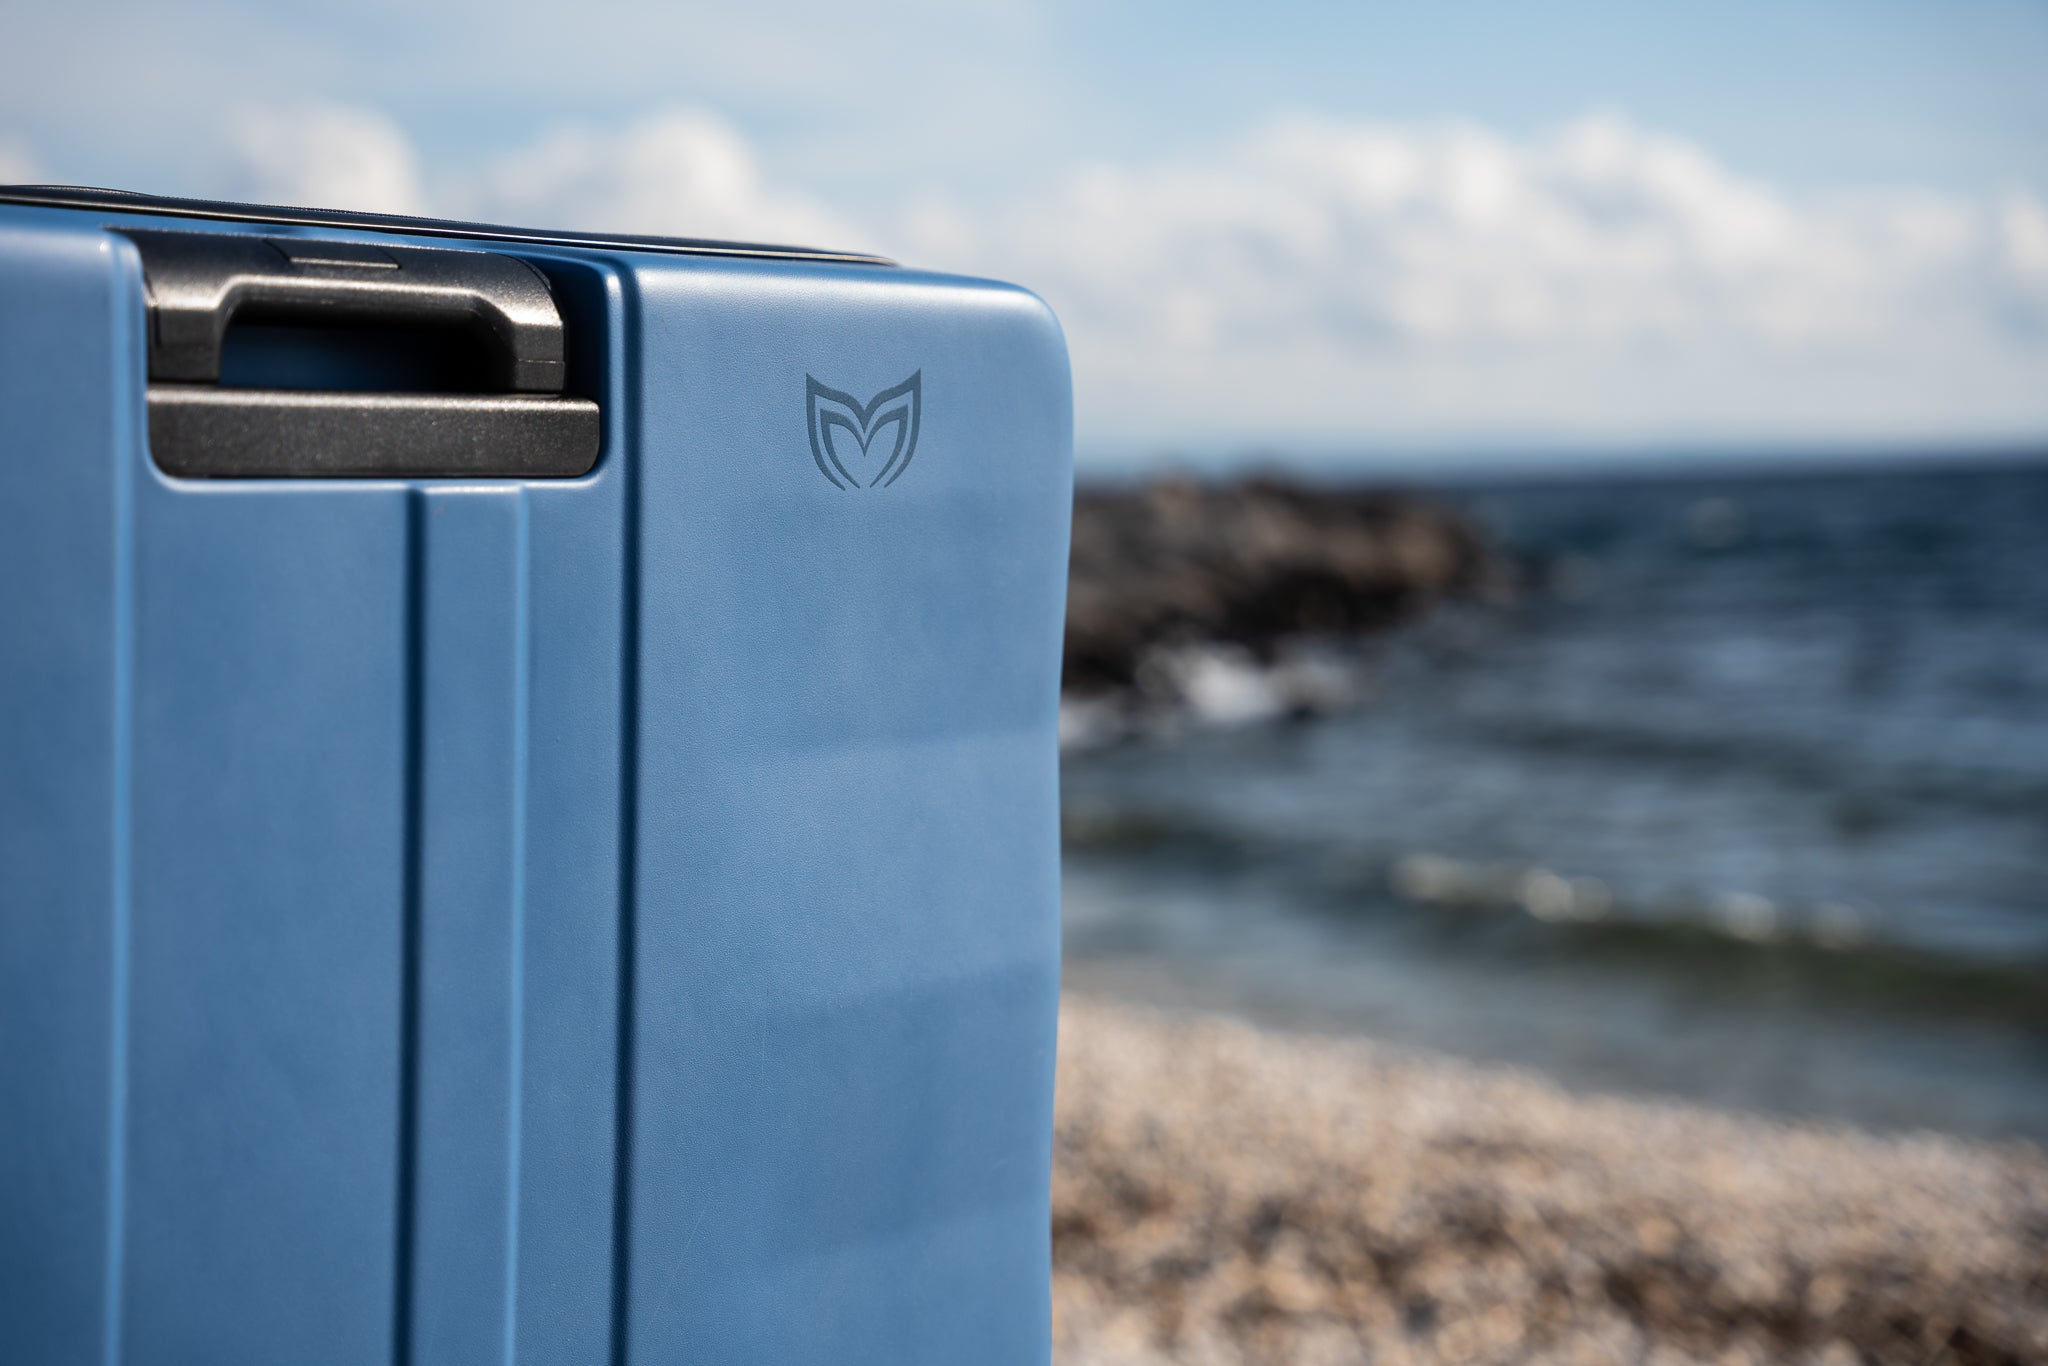 Close up to Molchanovs logo on blue hard case and beach background